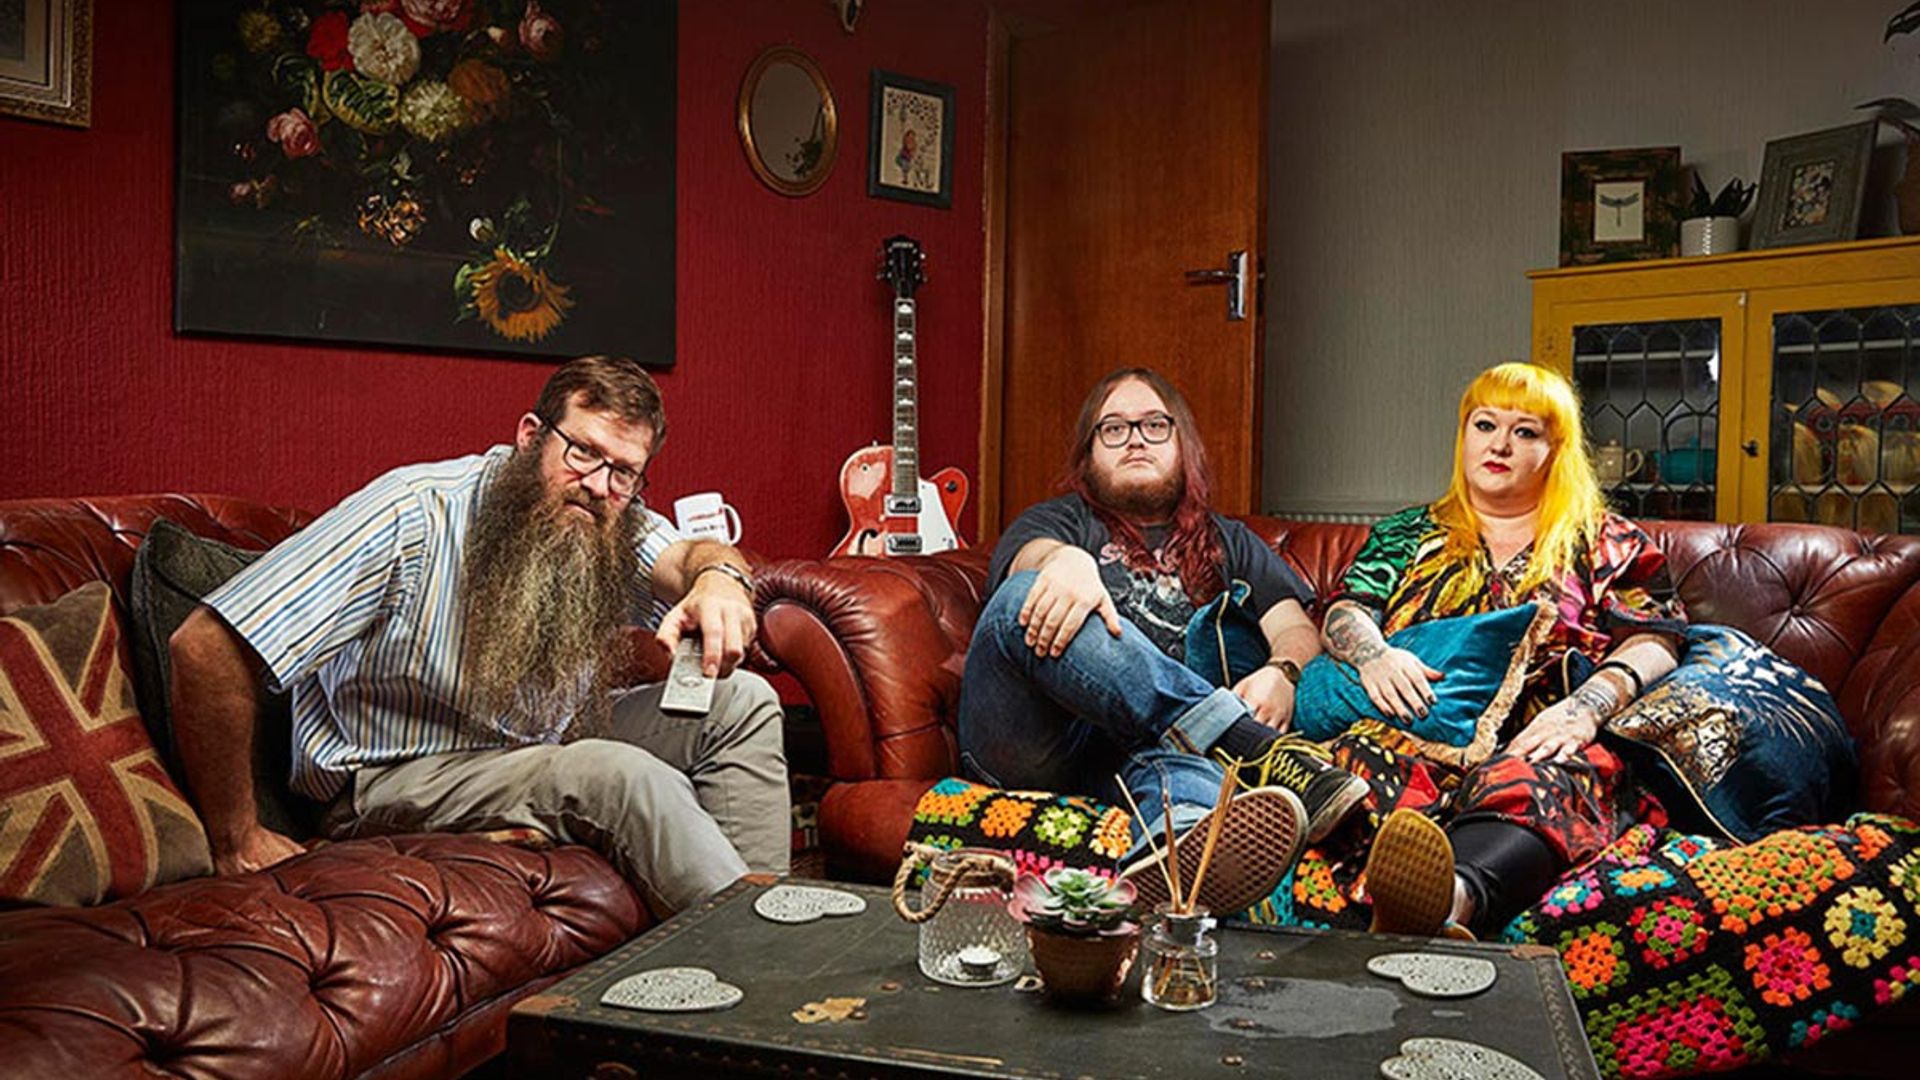 All you need to know about the McCormick family in Gogglebox